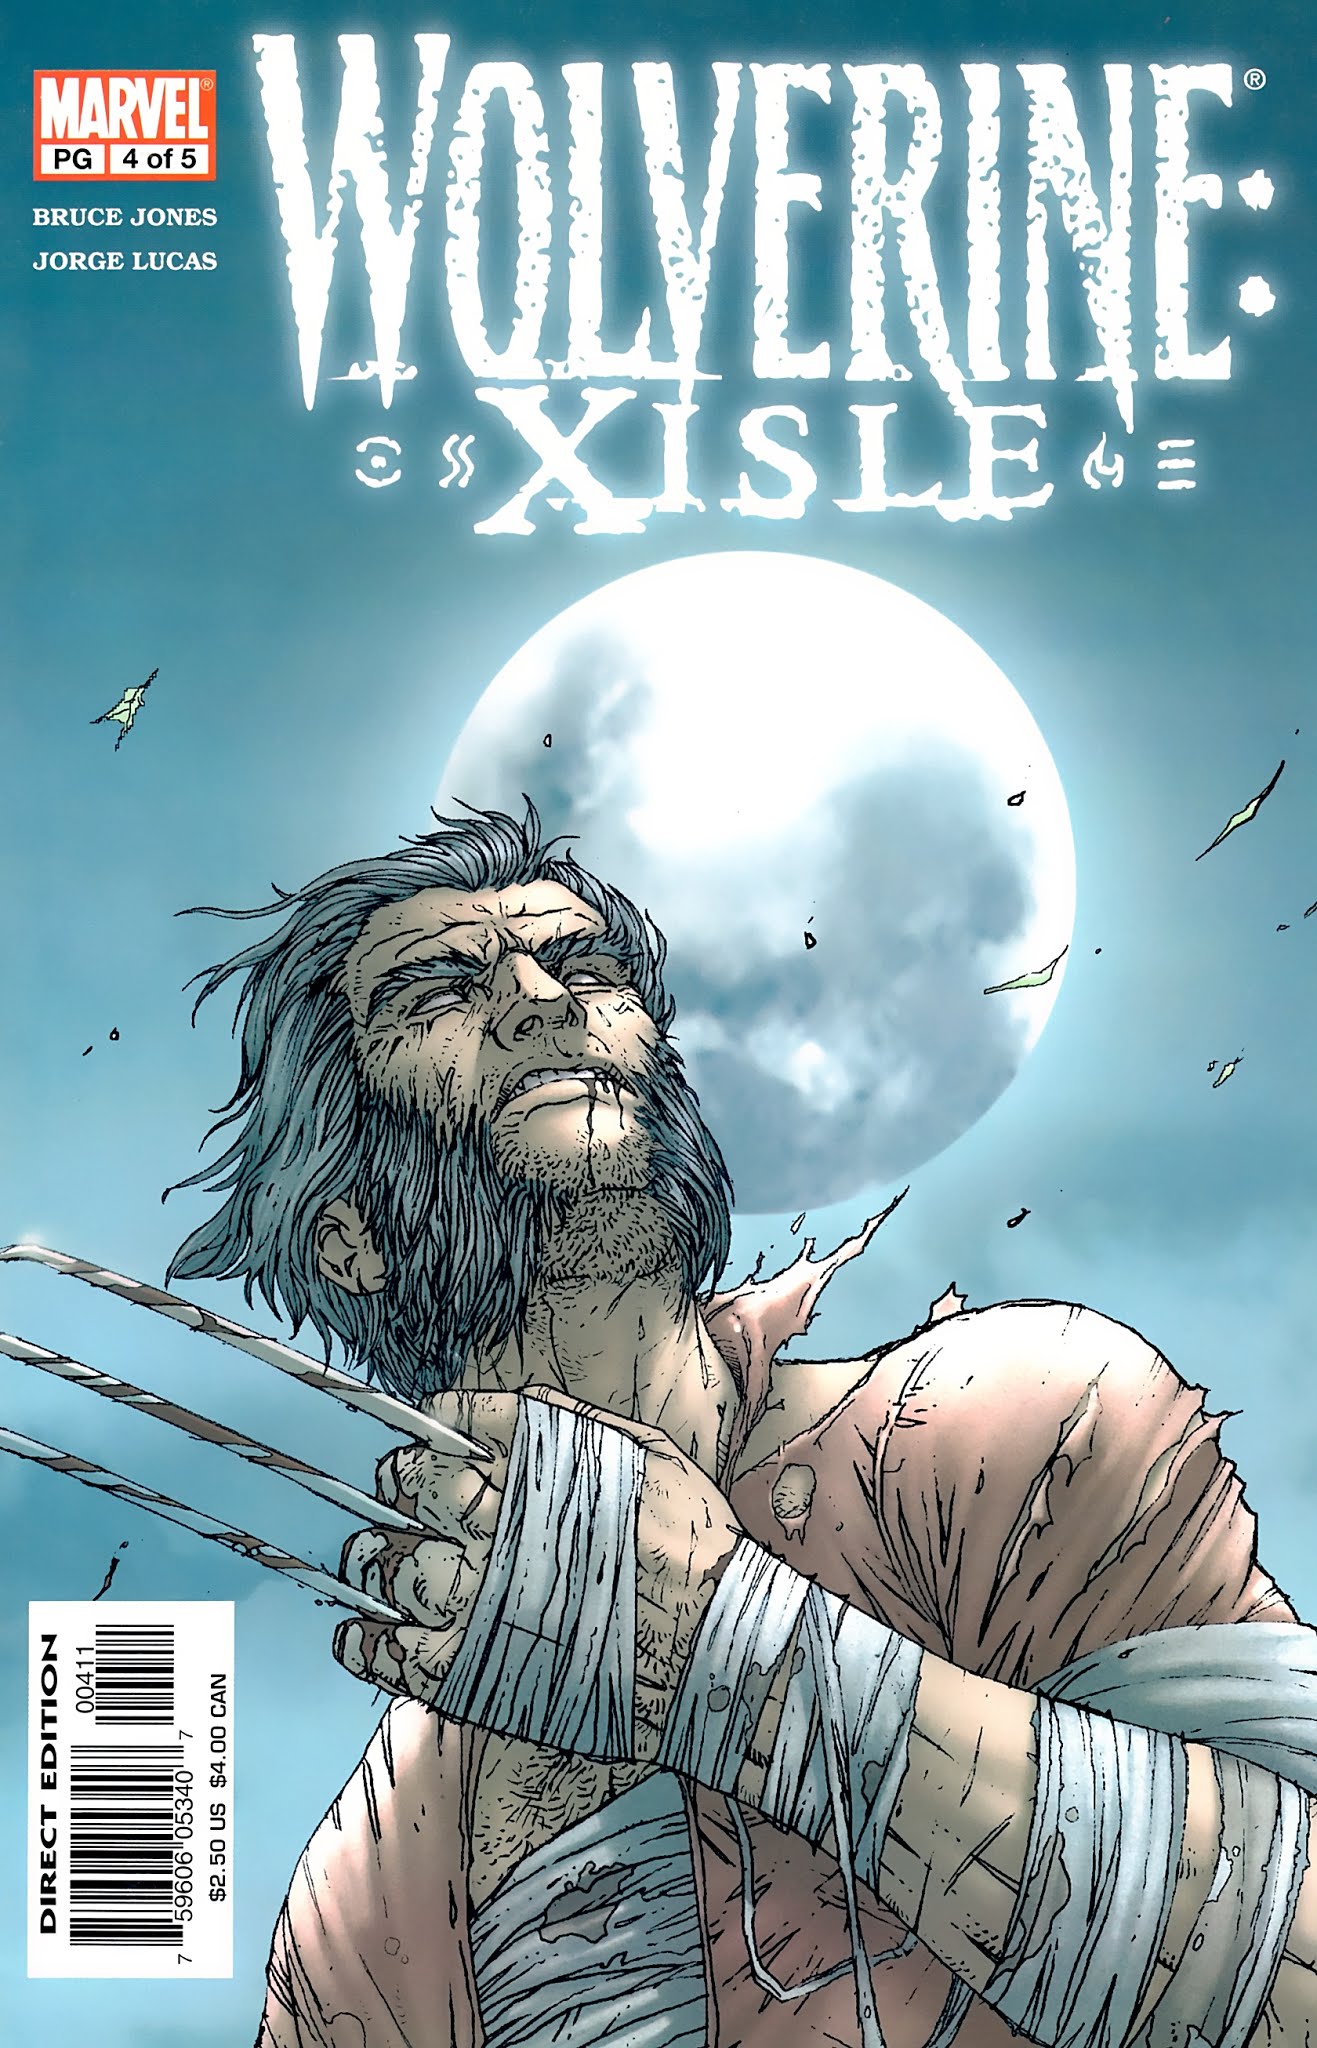 Read online Wolverine: Xisle comic -  Issue #4 - 1